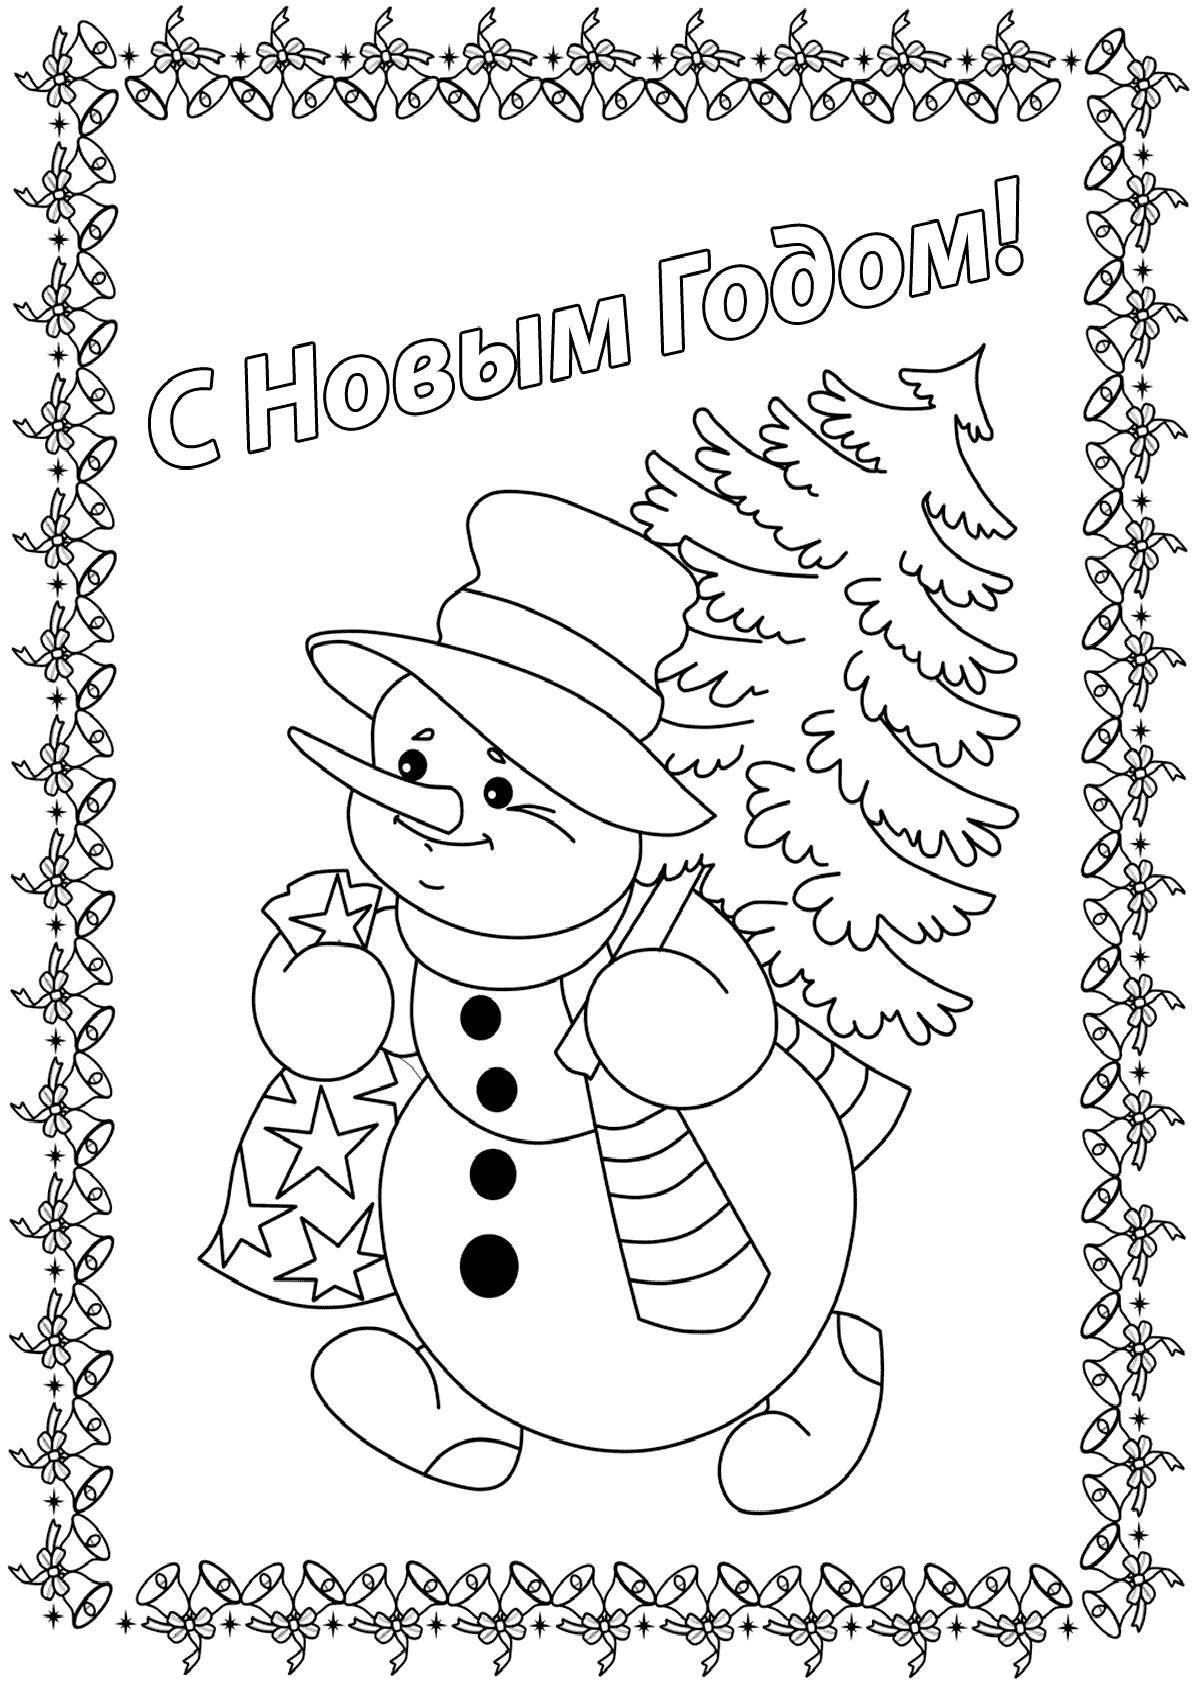 Happy new year coloring book